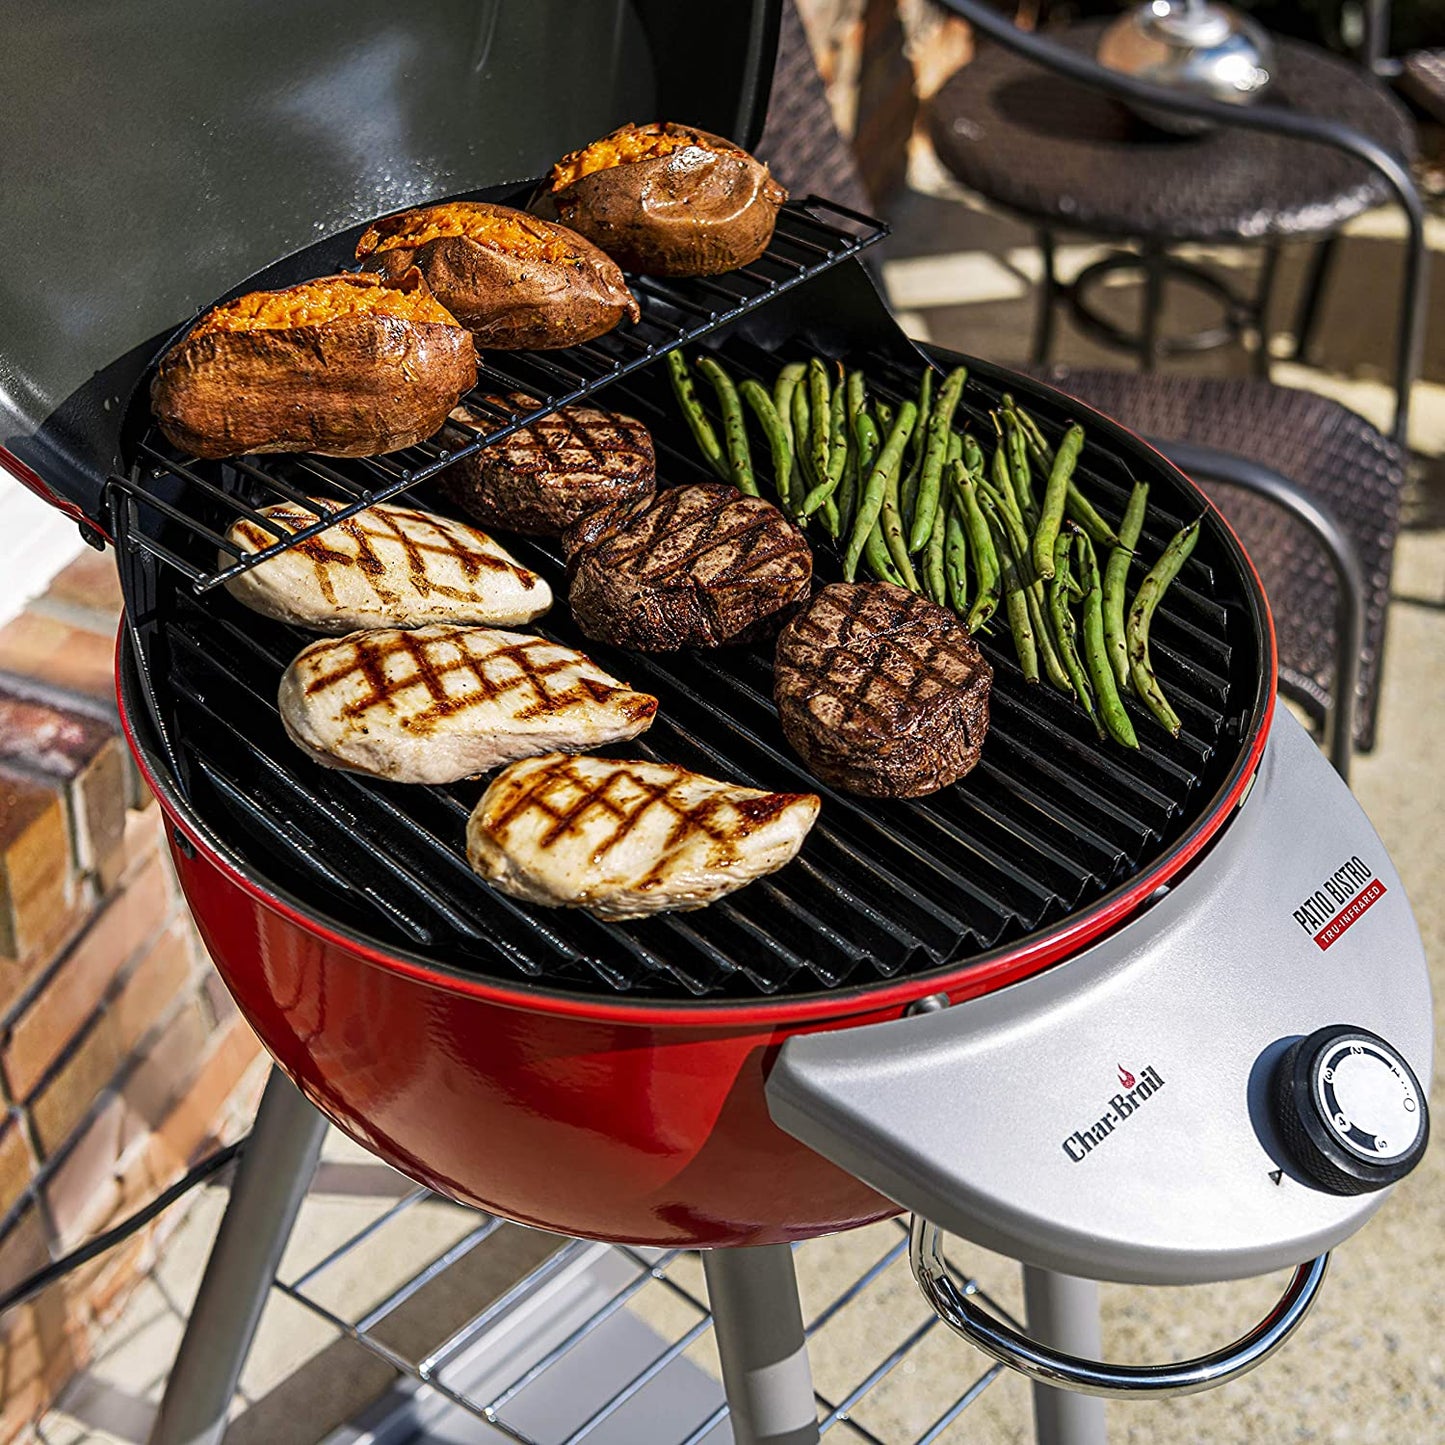 ® Patio Bistro® Tru-Infrared™ Electric Grill, Red – 20602109